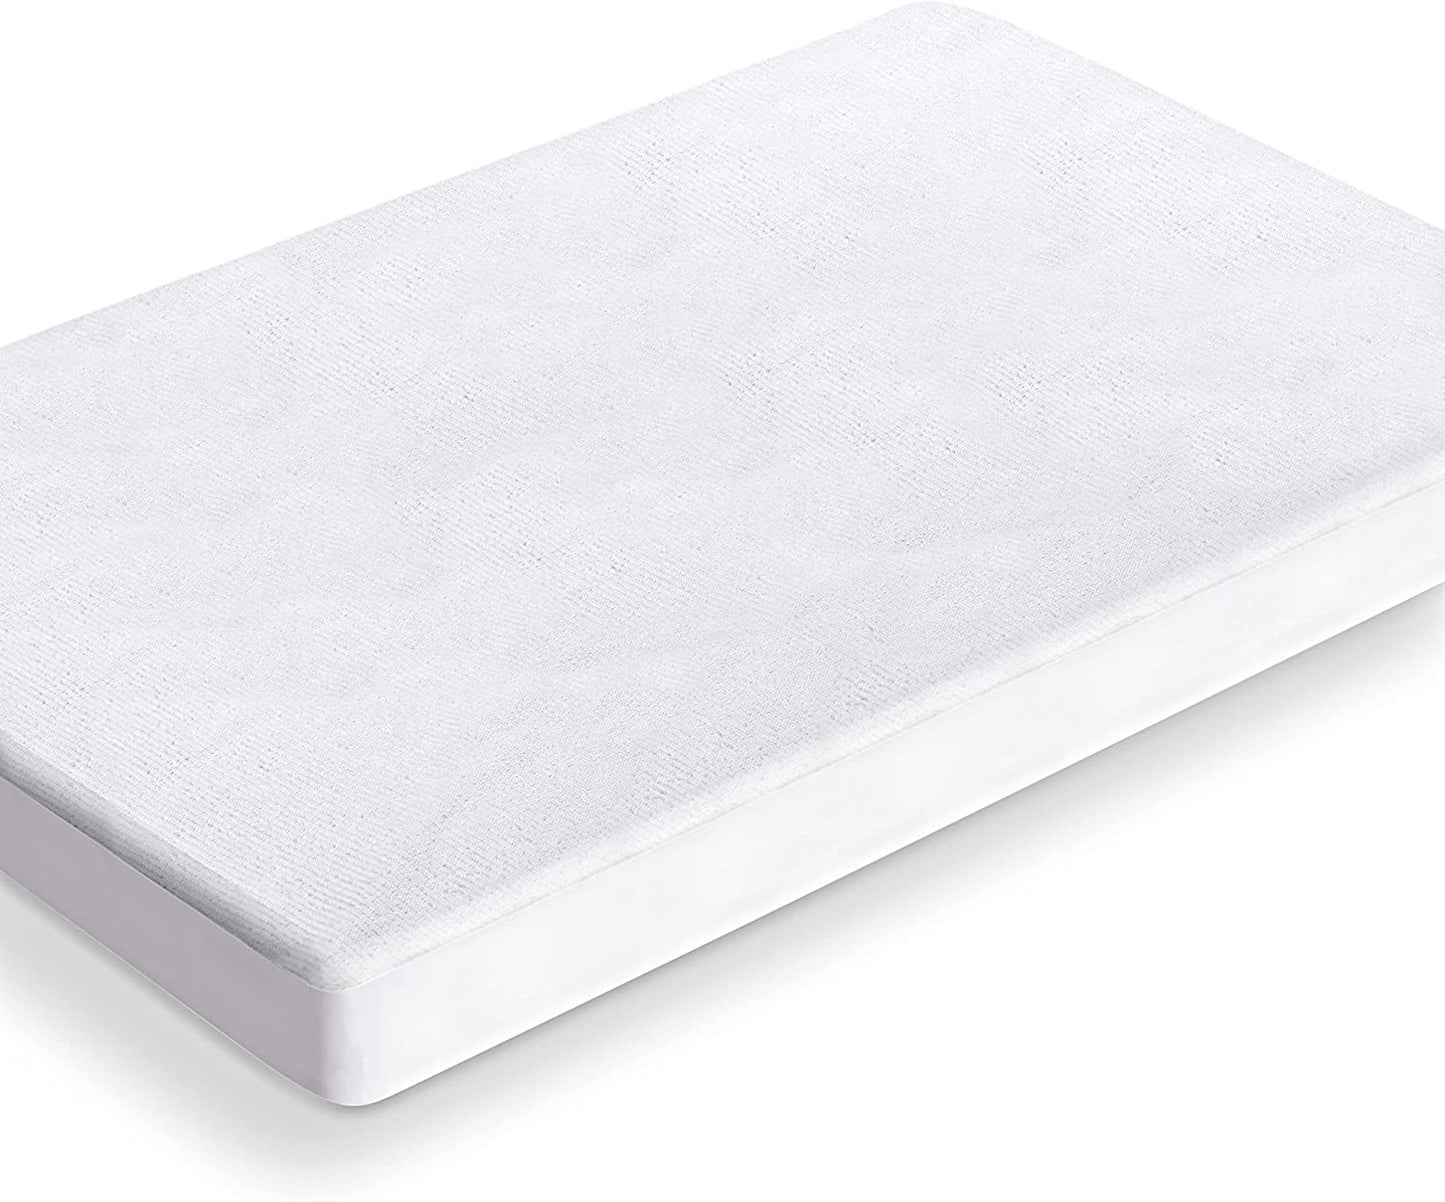 100% Waterproof Mattress Protector - Extra Deep 40 Cm Stretch Skirt – Double(137X190) Cm Terry Towel Mattress Topper – anti Allergy and Breathable Fitted Mattress Cover. (Double(137X190+40)Cm)